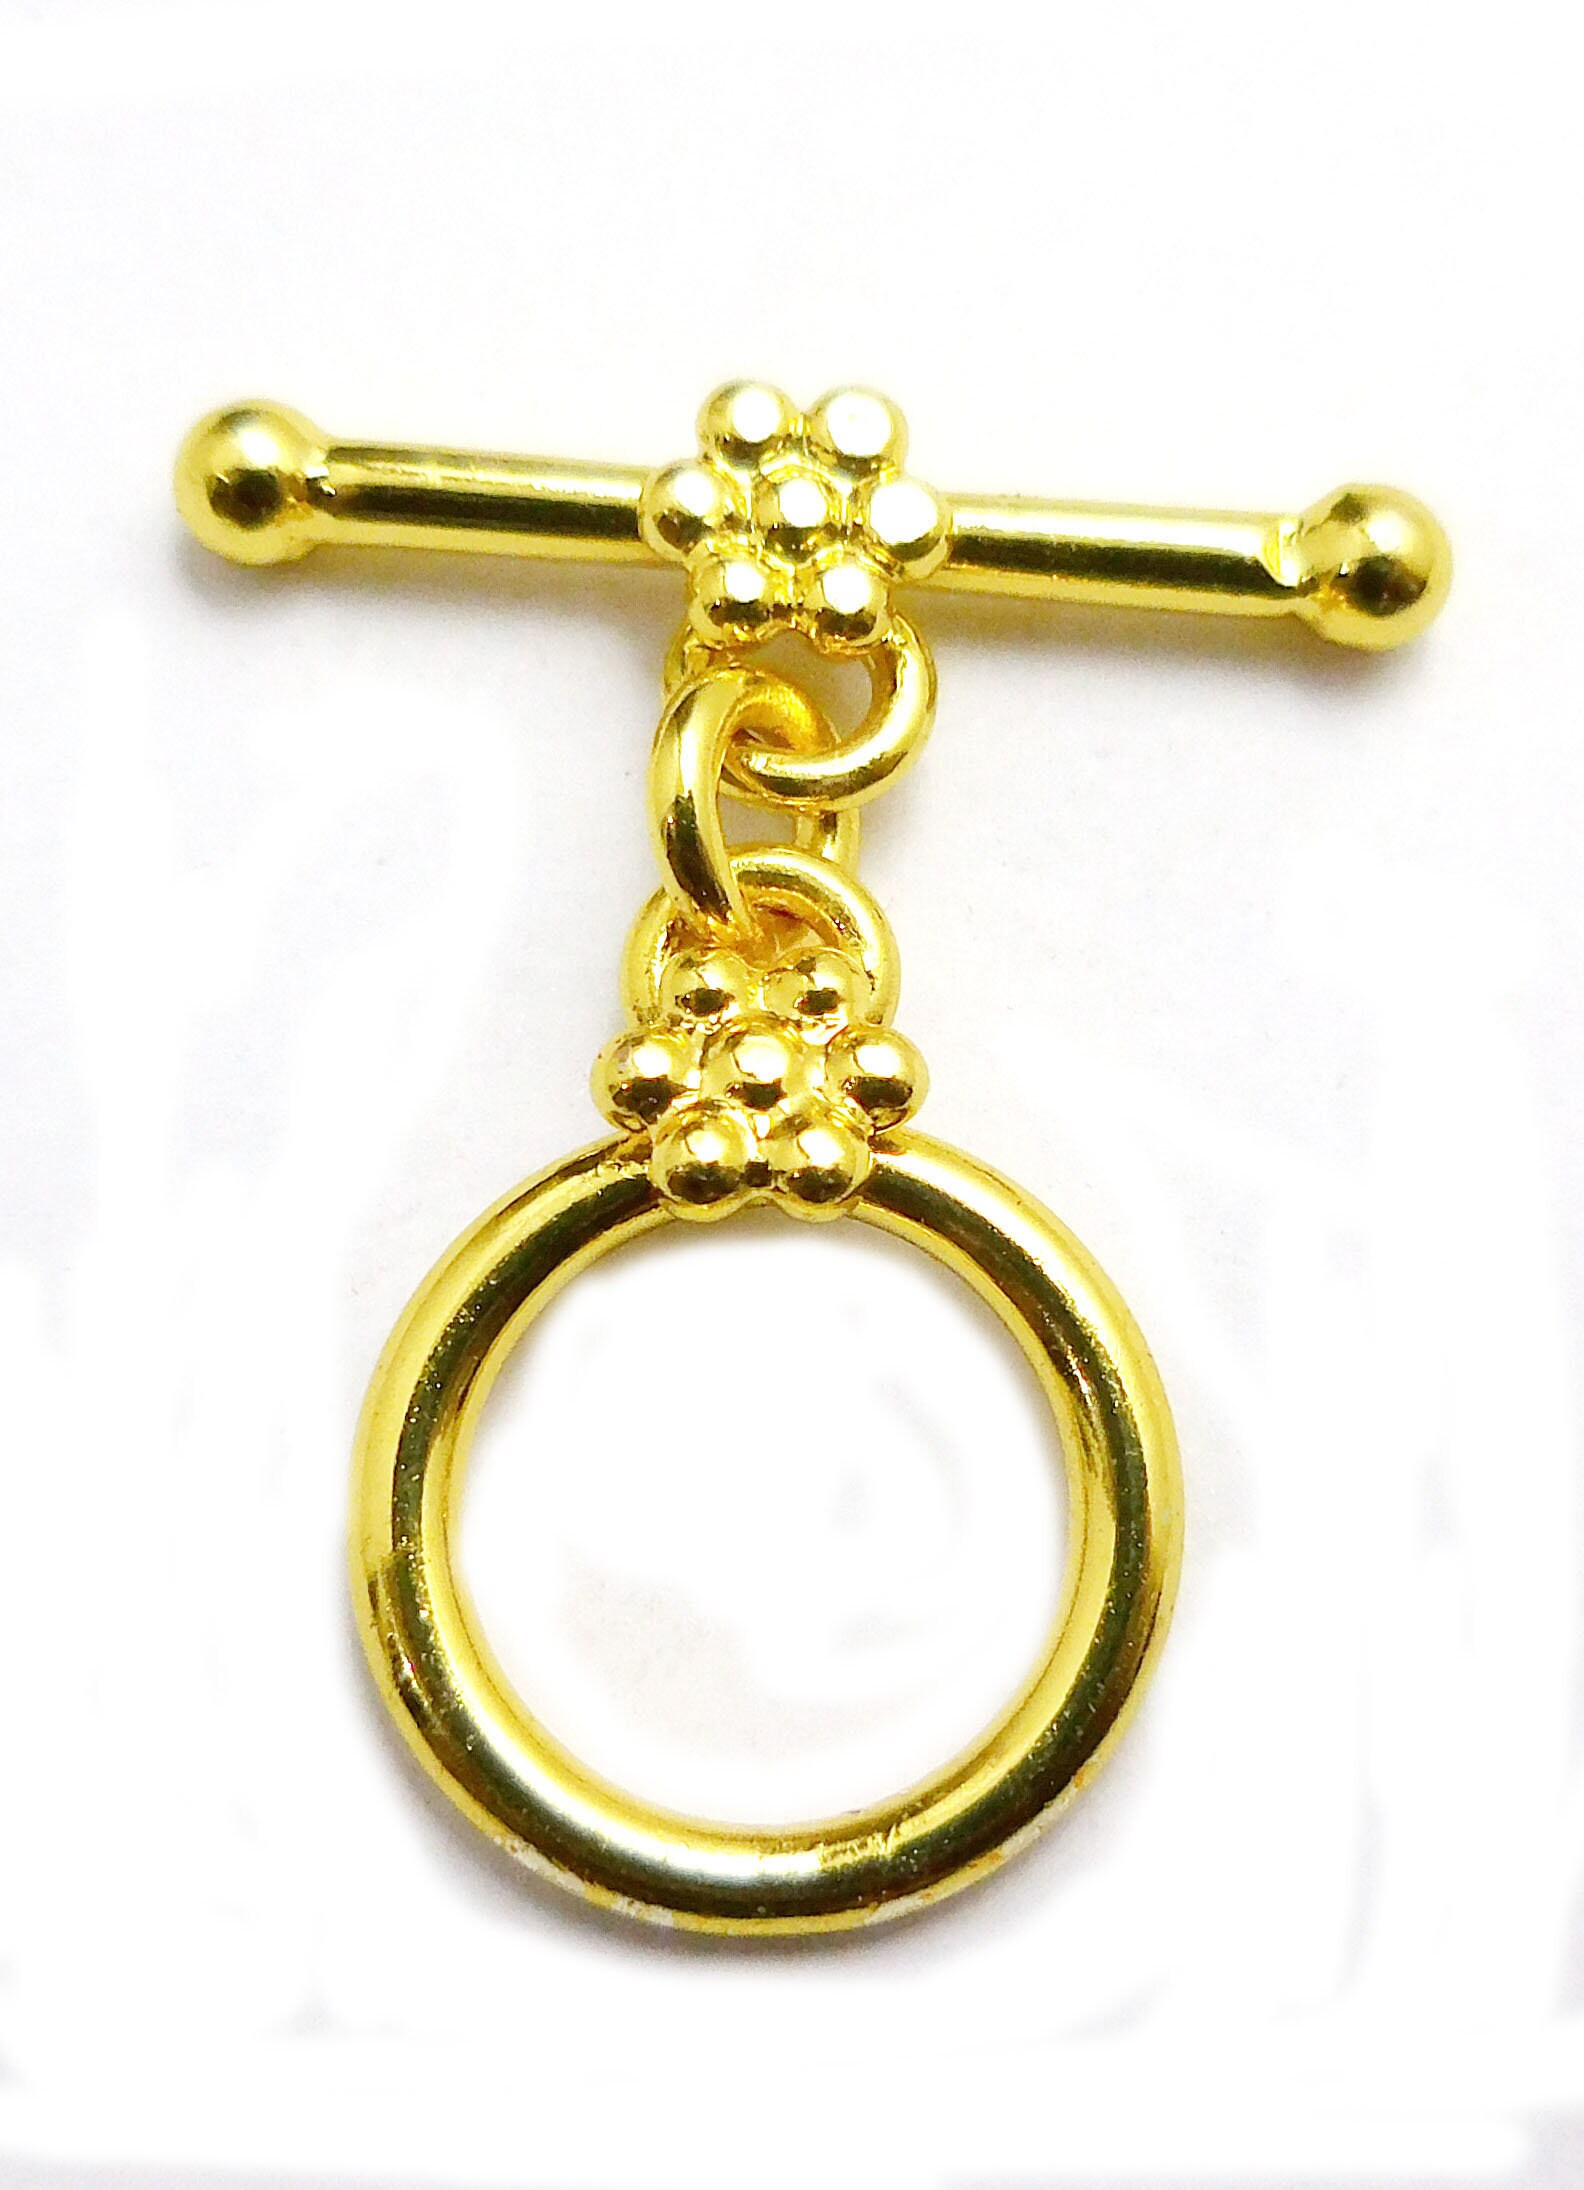 COPPER BALI TOGGLE CLASP ANTIQUED STERLING SILVER PLATED 24K GOLD PLATED 568 